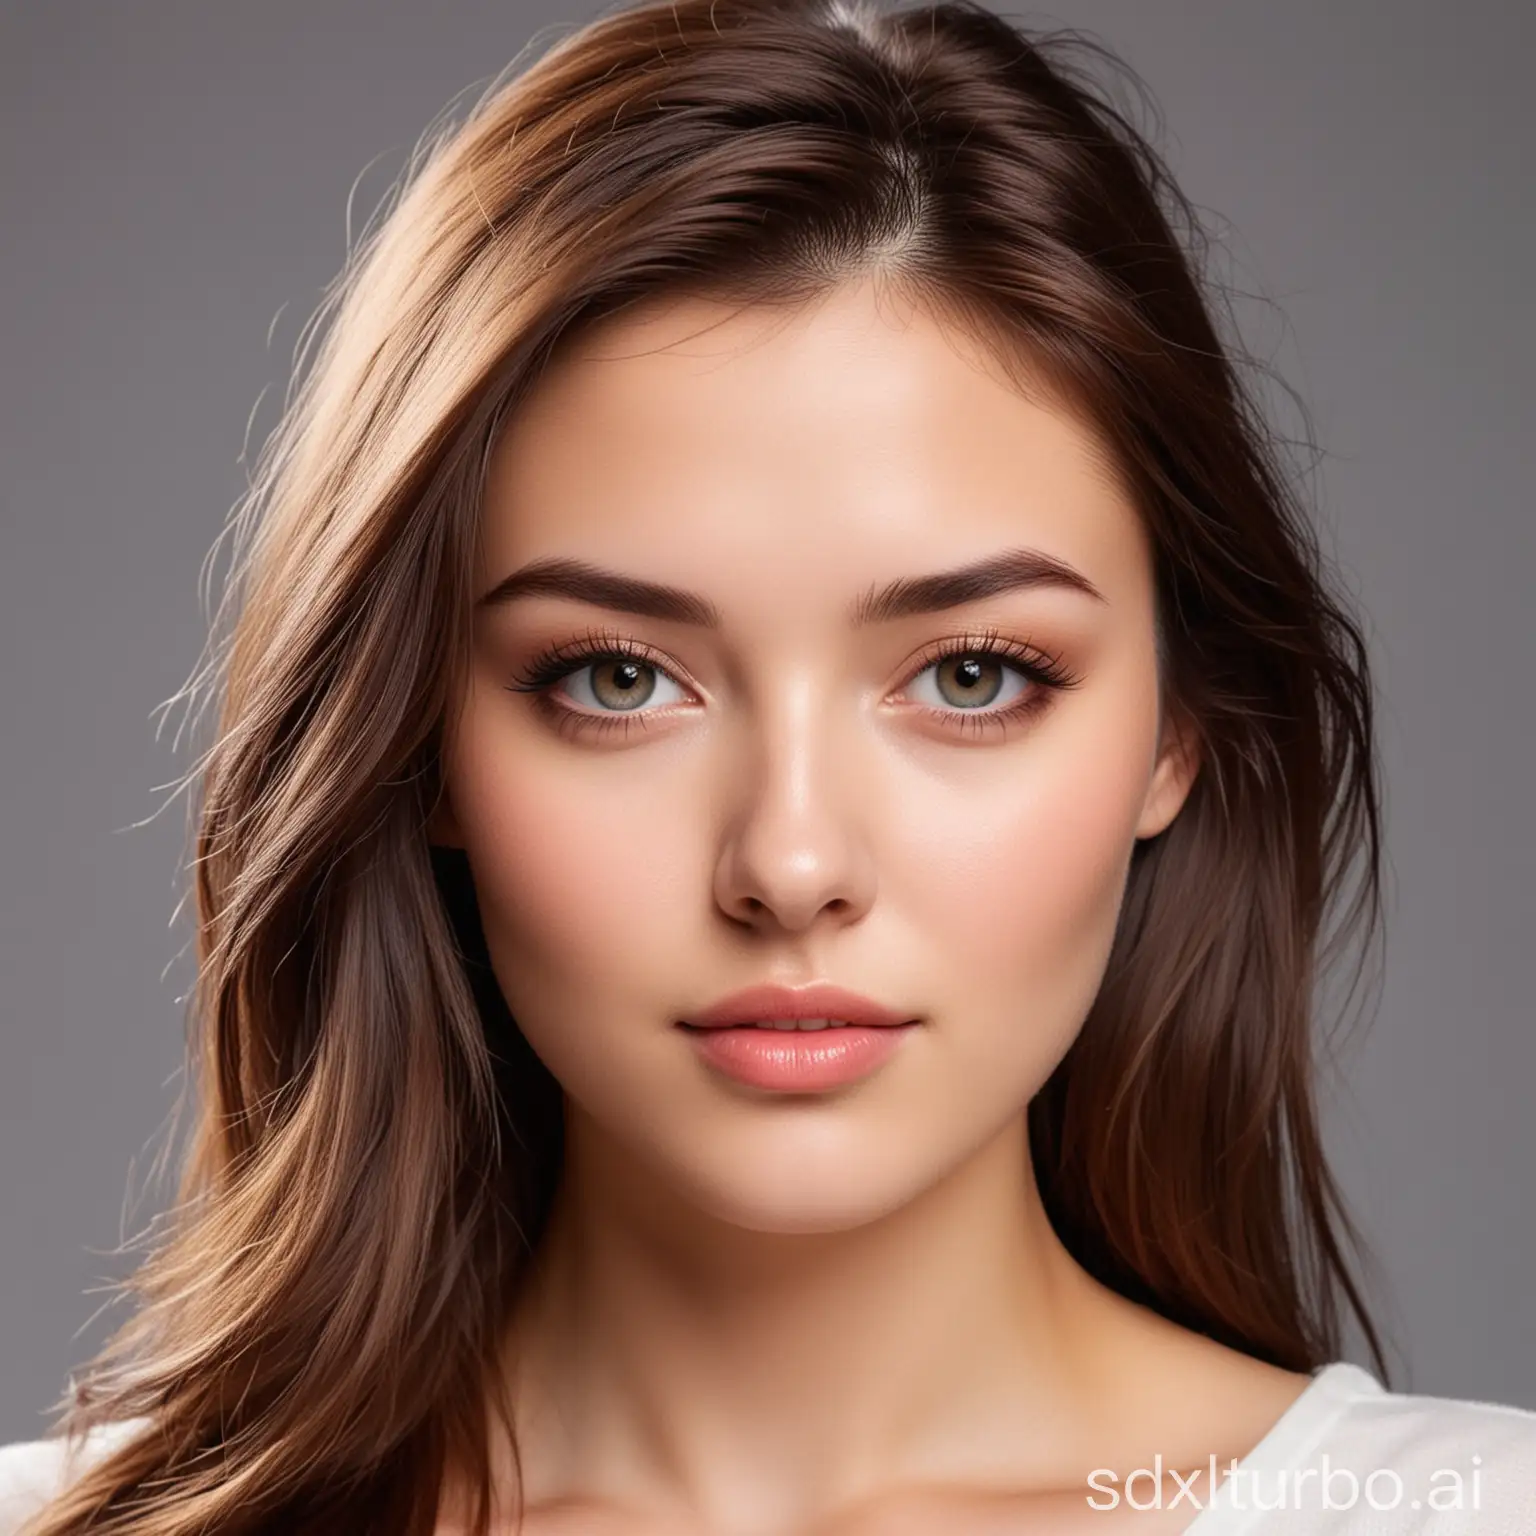 beautiful round face charming female model .
